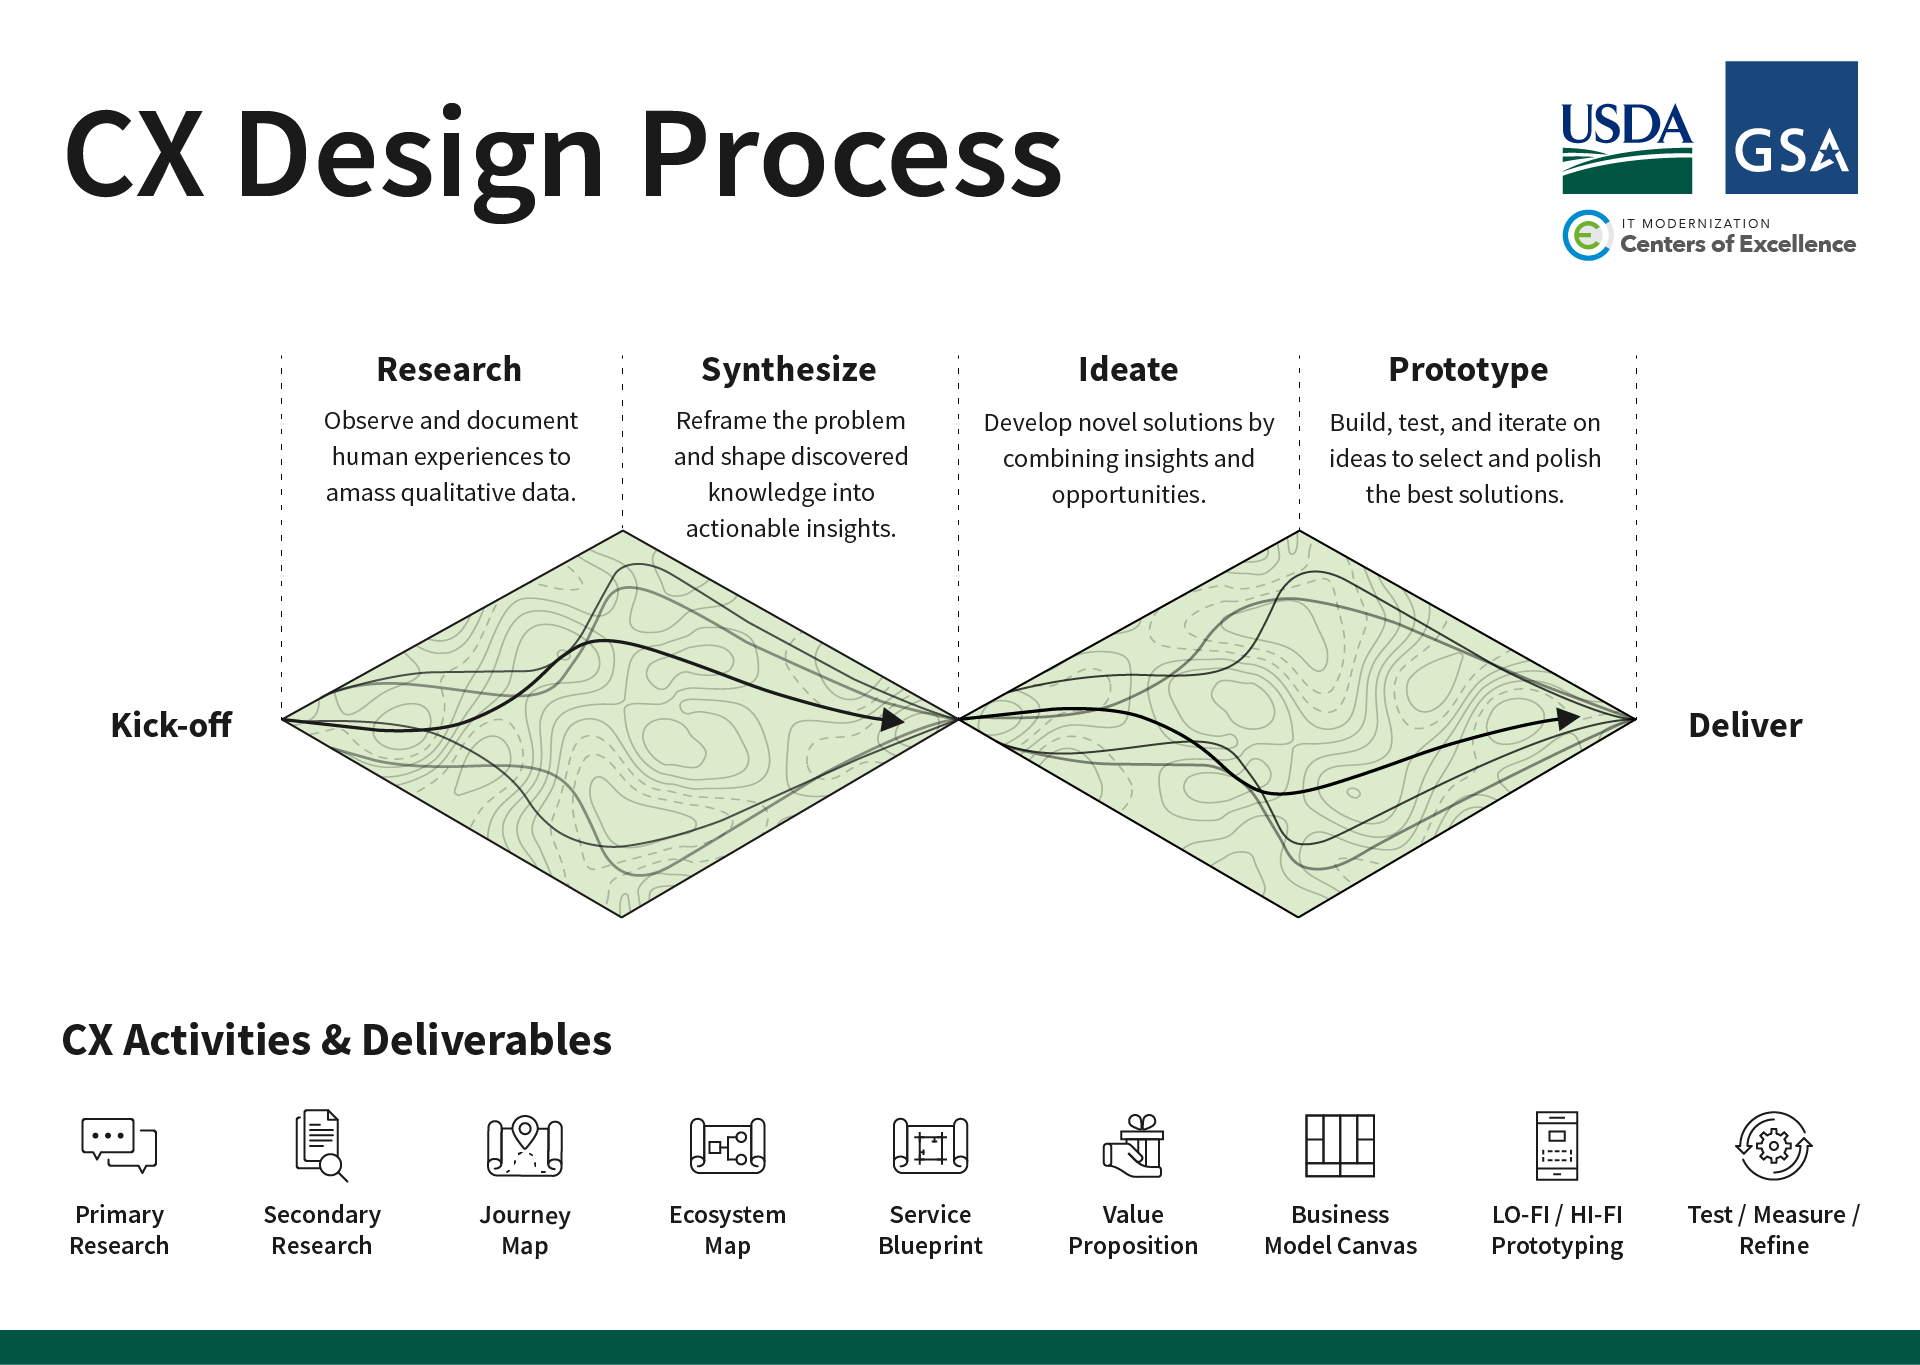 The steps included in the customer experience design process includes a kick-off, research, synthesis, ideation, and protoyping to delivery